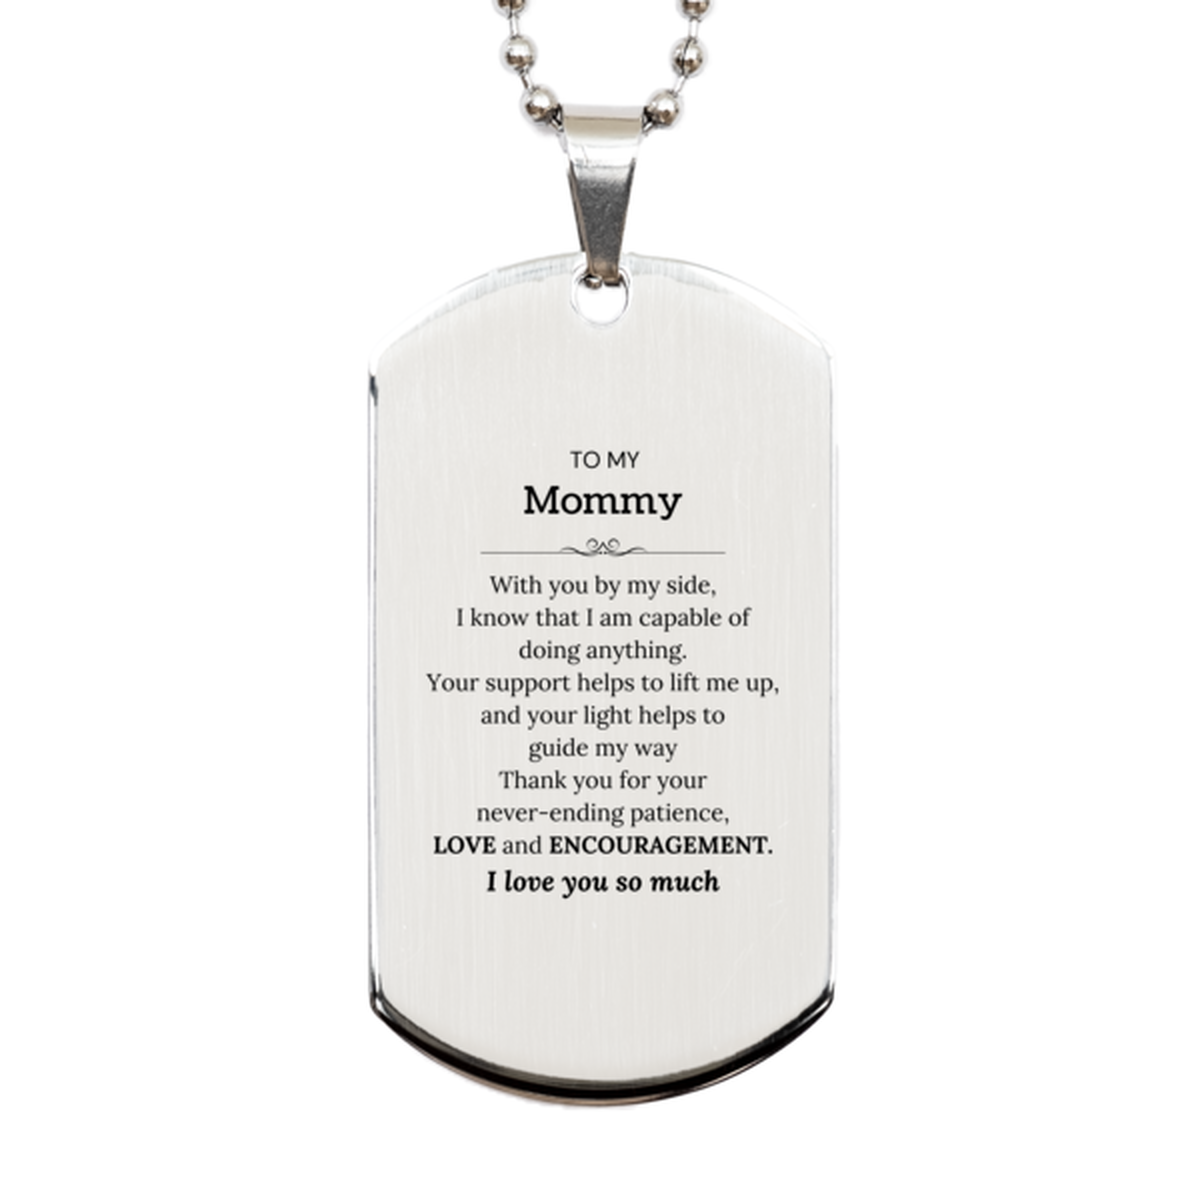 Appreciation Mommy Silver Dog Tag Gifts, To My Mommy Birthday Christmas Wedding Keepsake Gifts for Mommy With you by my side, I know that I am capable of doing anything. I love you so much